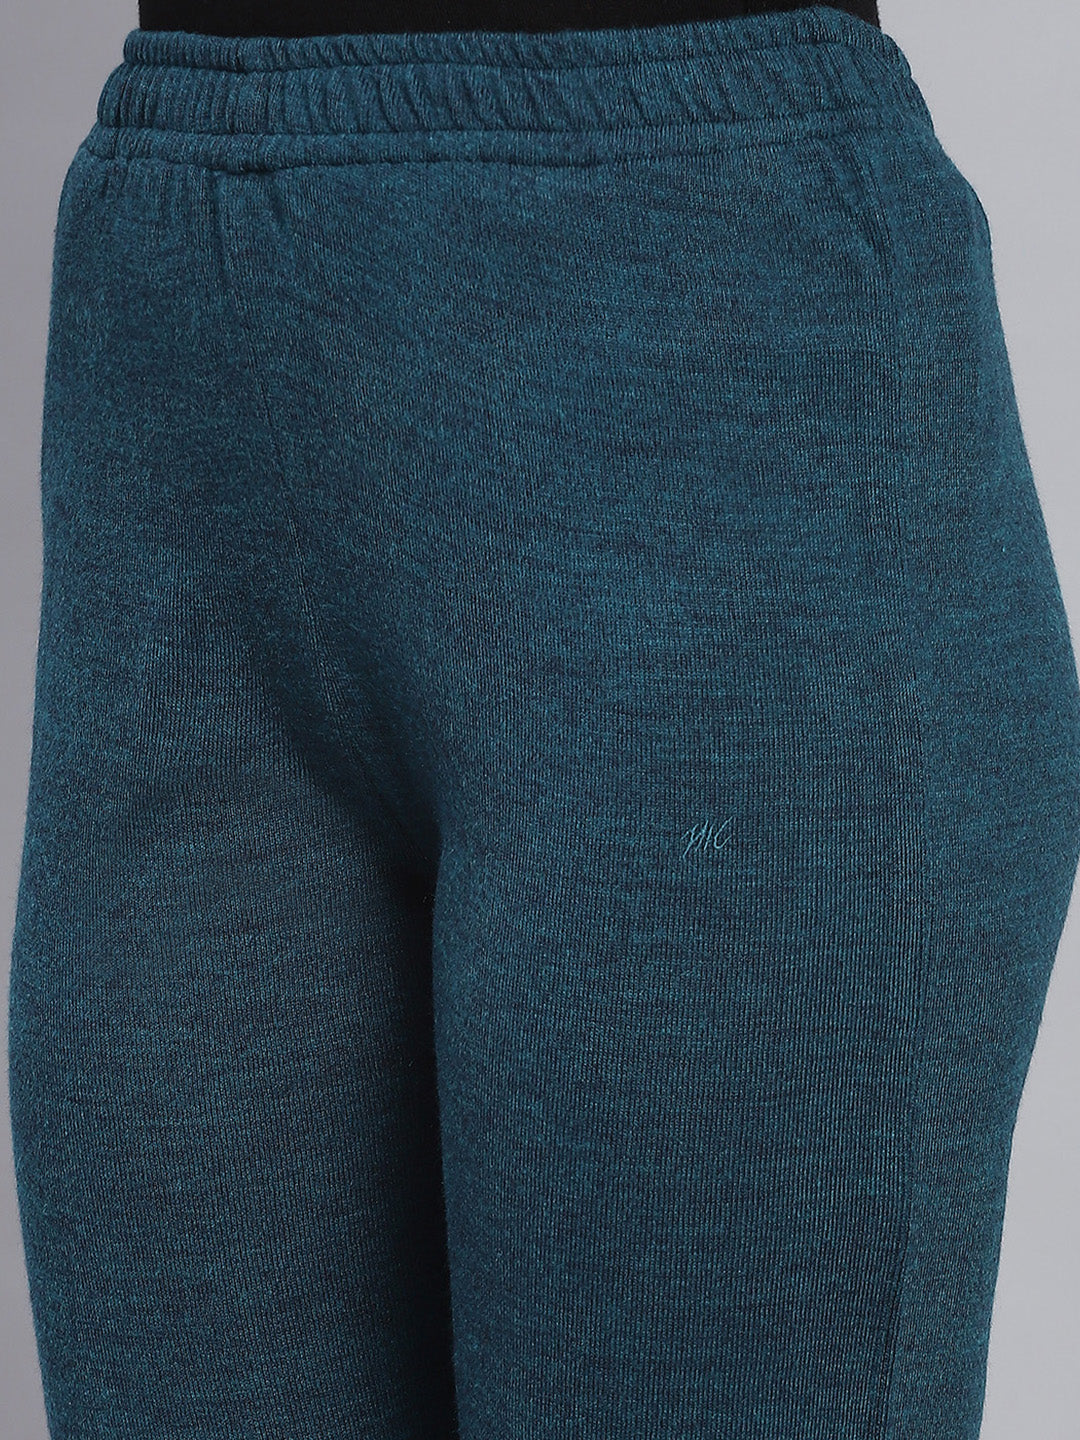 Women Teal Blue Solid Regular Fit Lowers